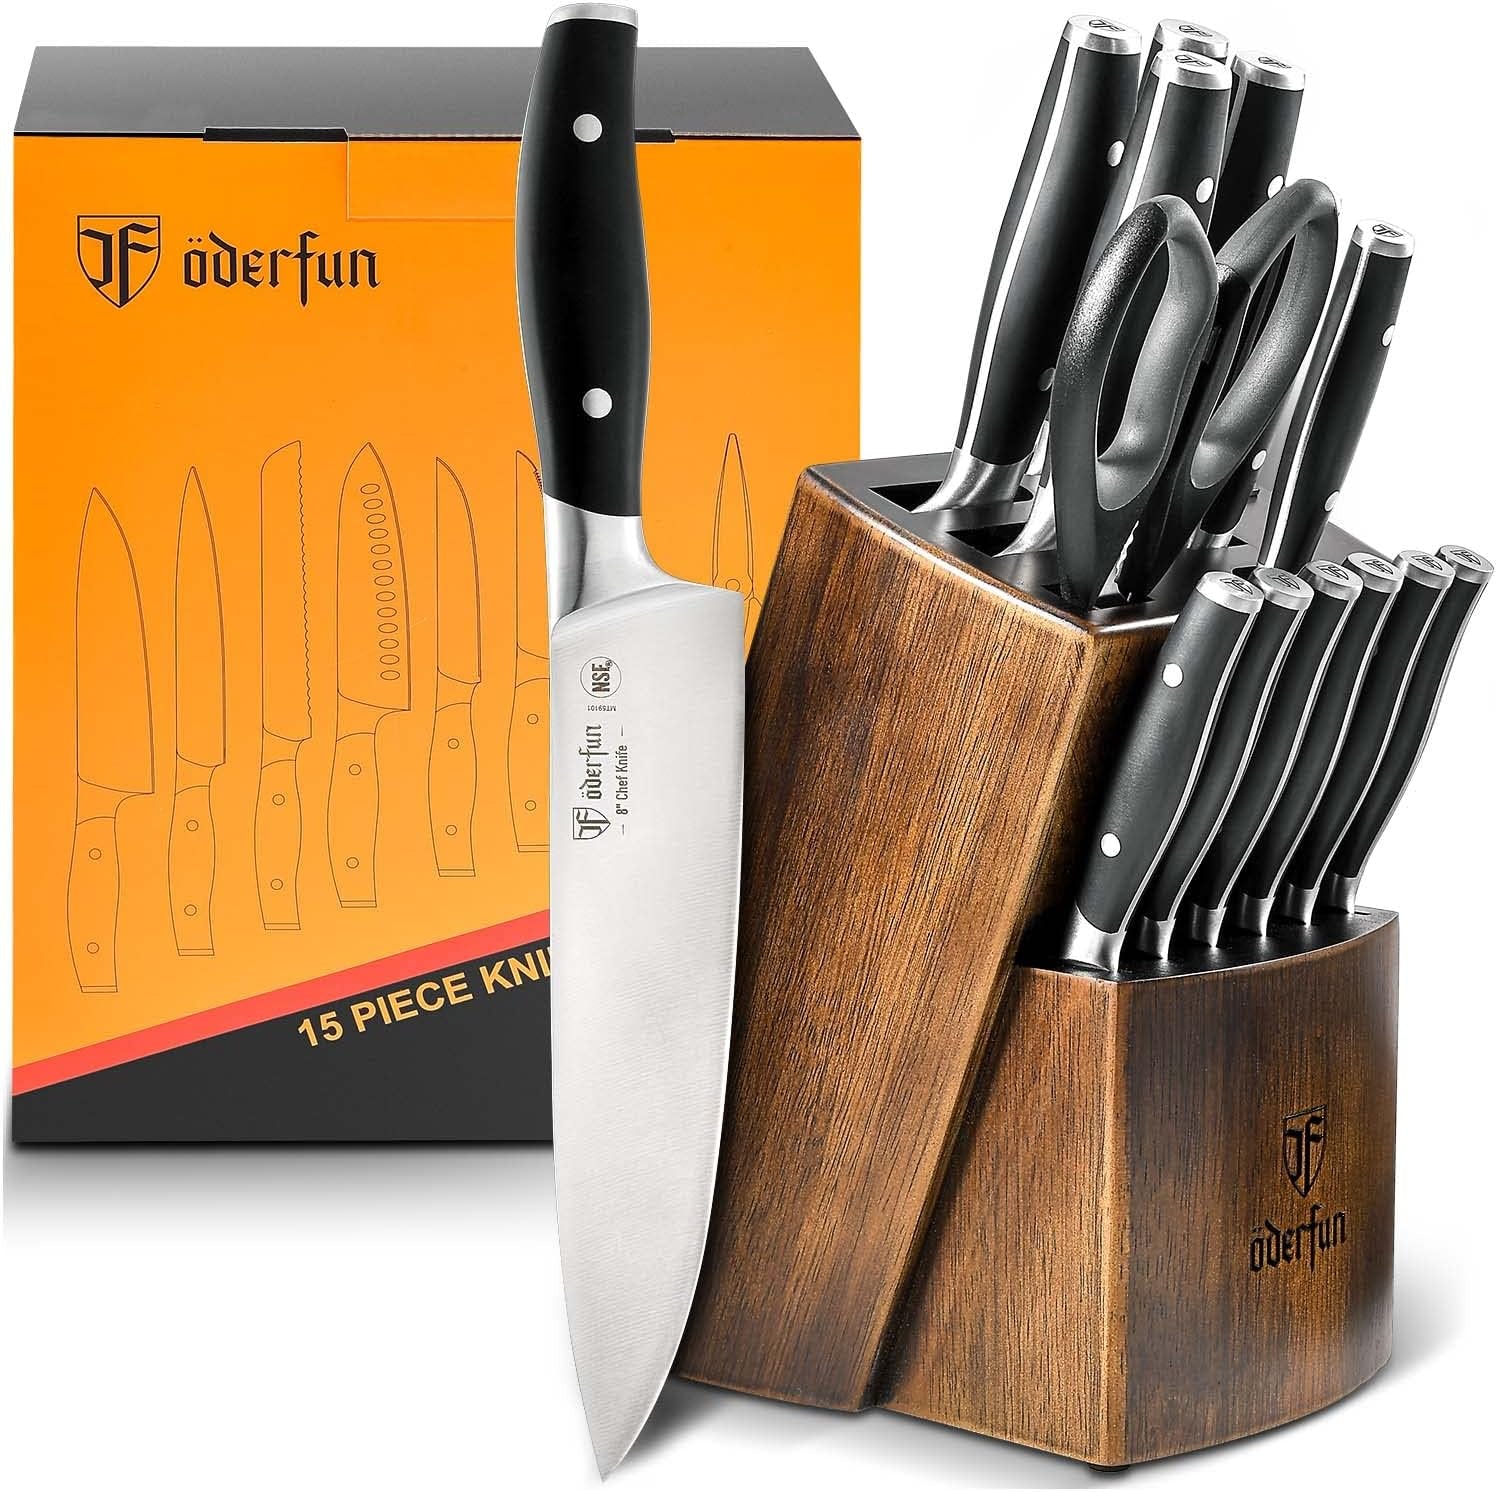 Steak Knives Set of 6, ODERFUN 6 Piece Steak Knives Sharp and Serrated  Steak Knife, Full Tang and Ergonomic Handle, 4.5 Inch German Stainless  Steel